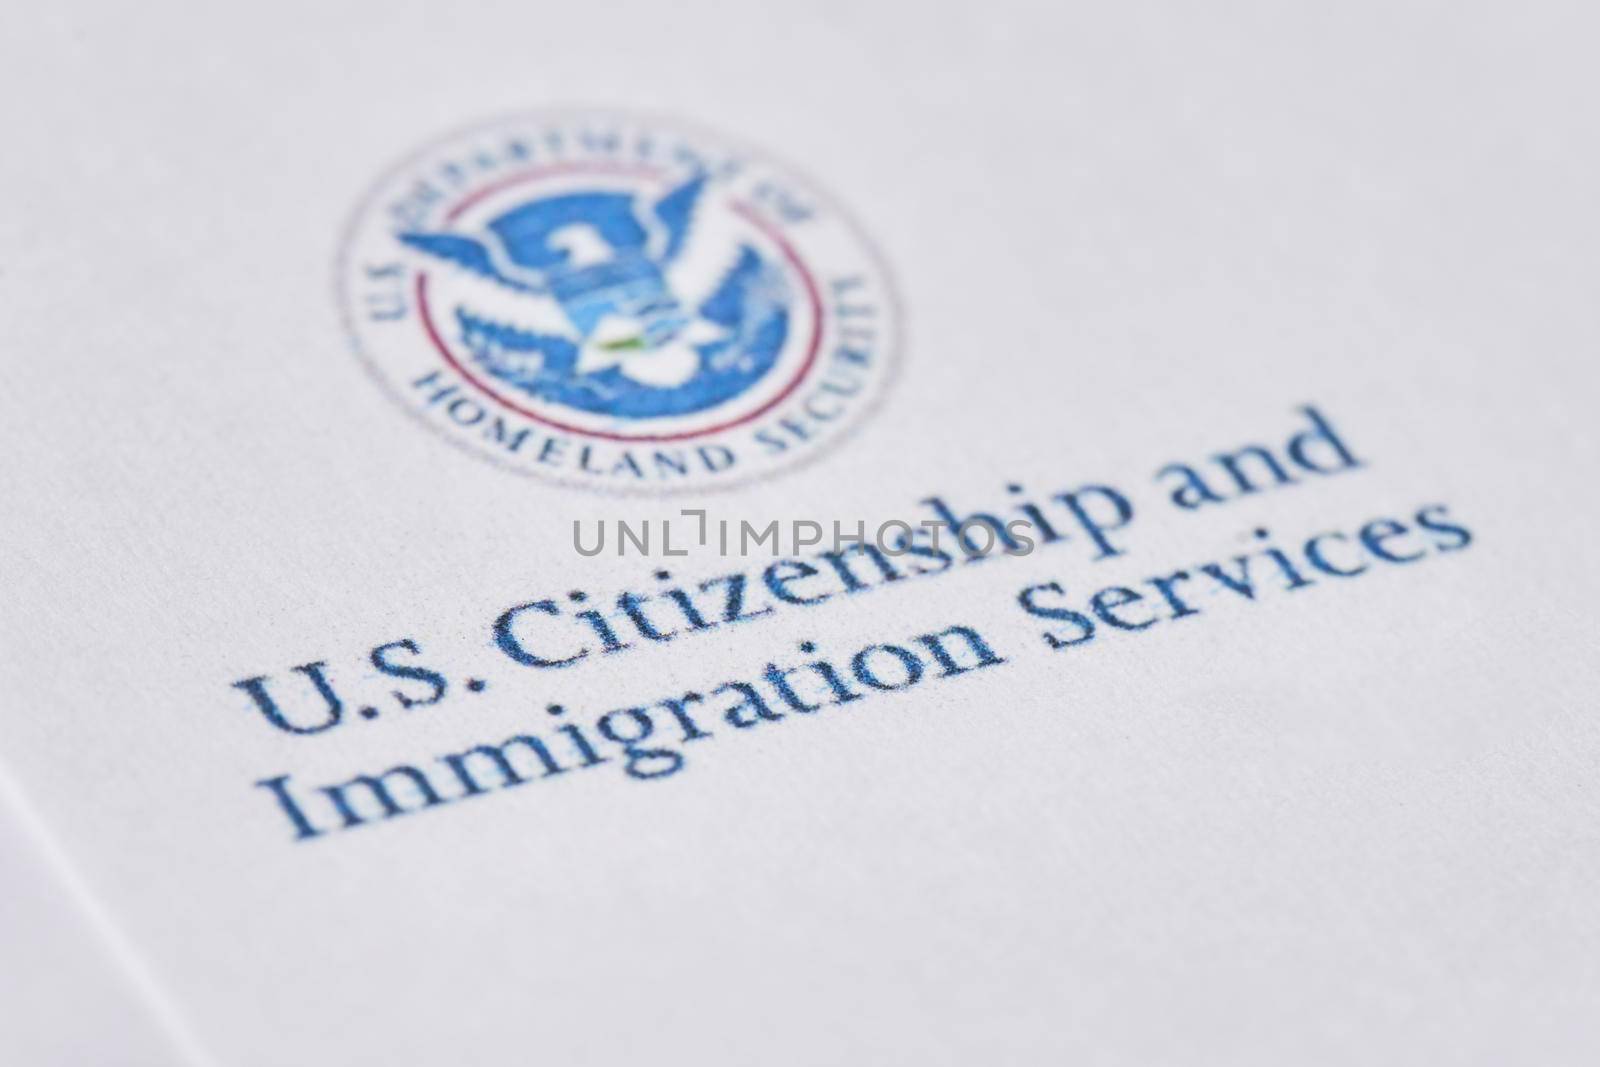 U.S. Citizenship and Immigration Services by golibtolibov